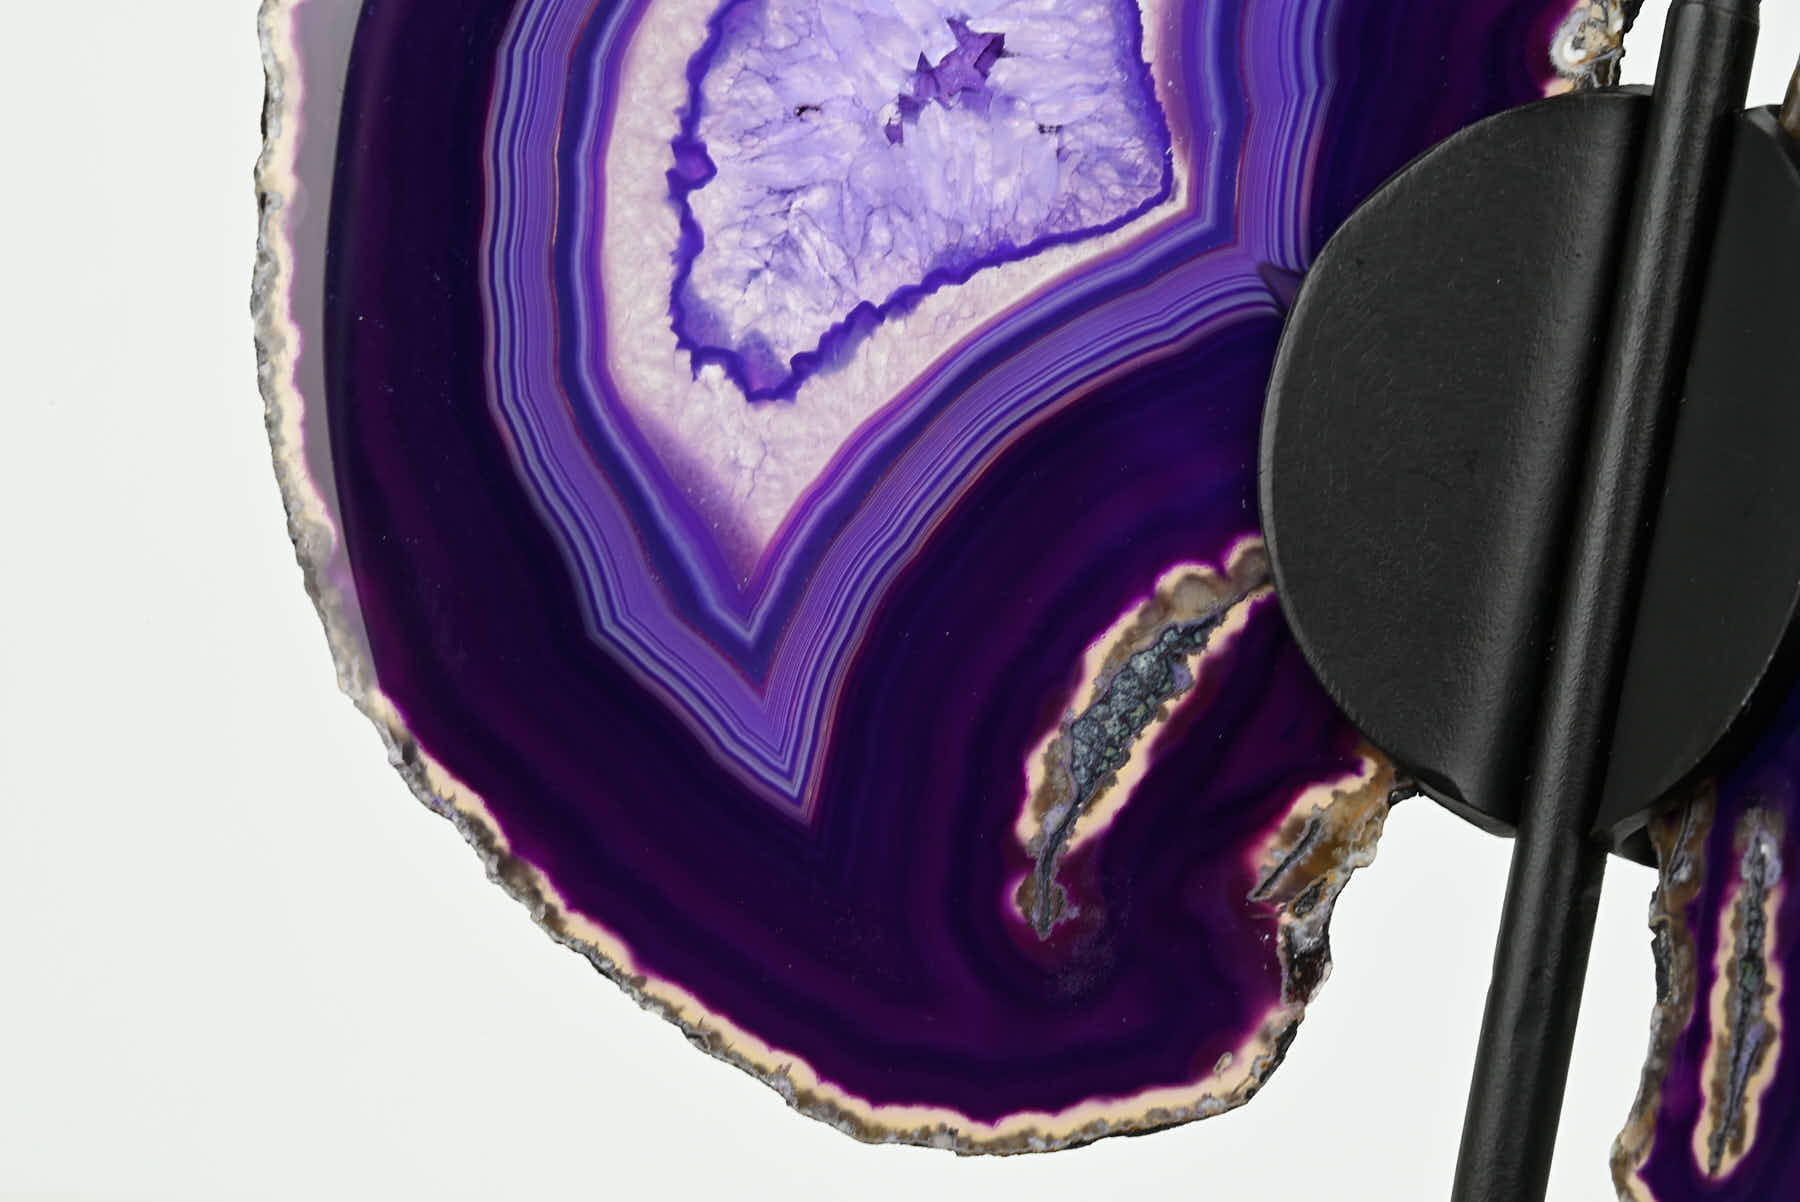 Purple Agate Butterfly on Stand - 0.57kg and 27cm Tall - #BUPURP-10007